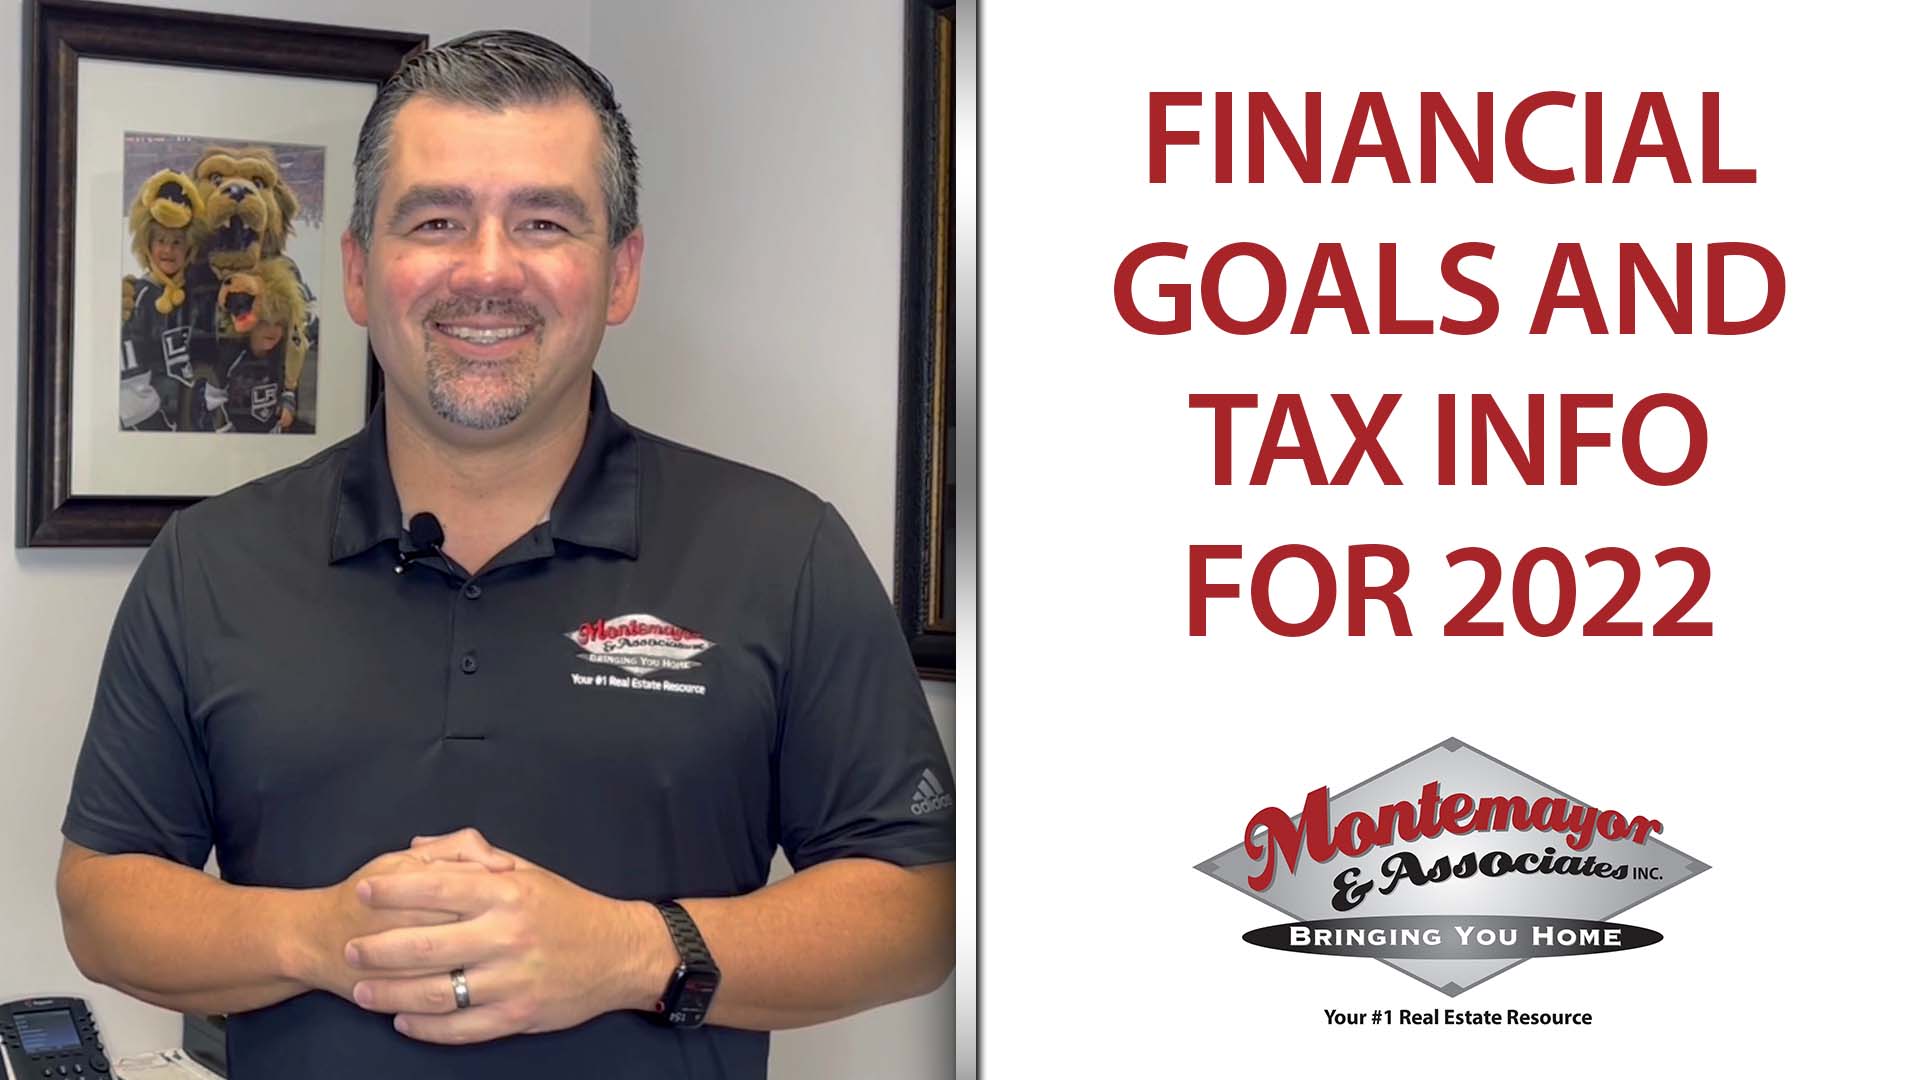 What Are Your 2022 Financial Goals?